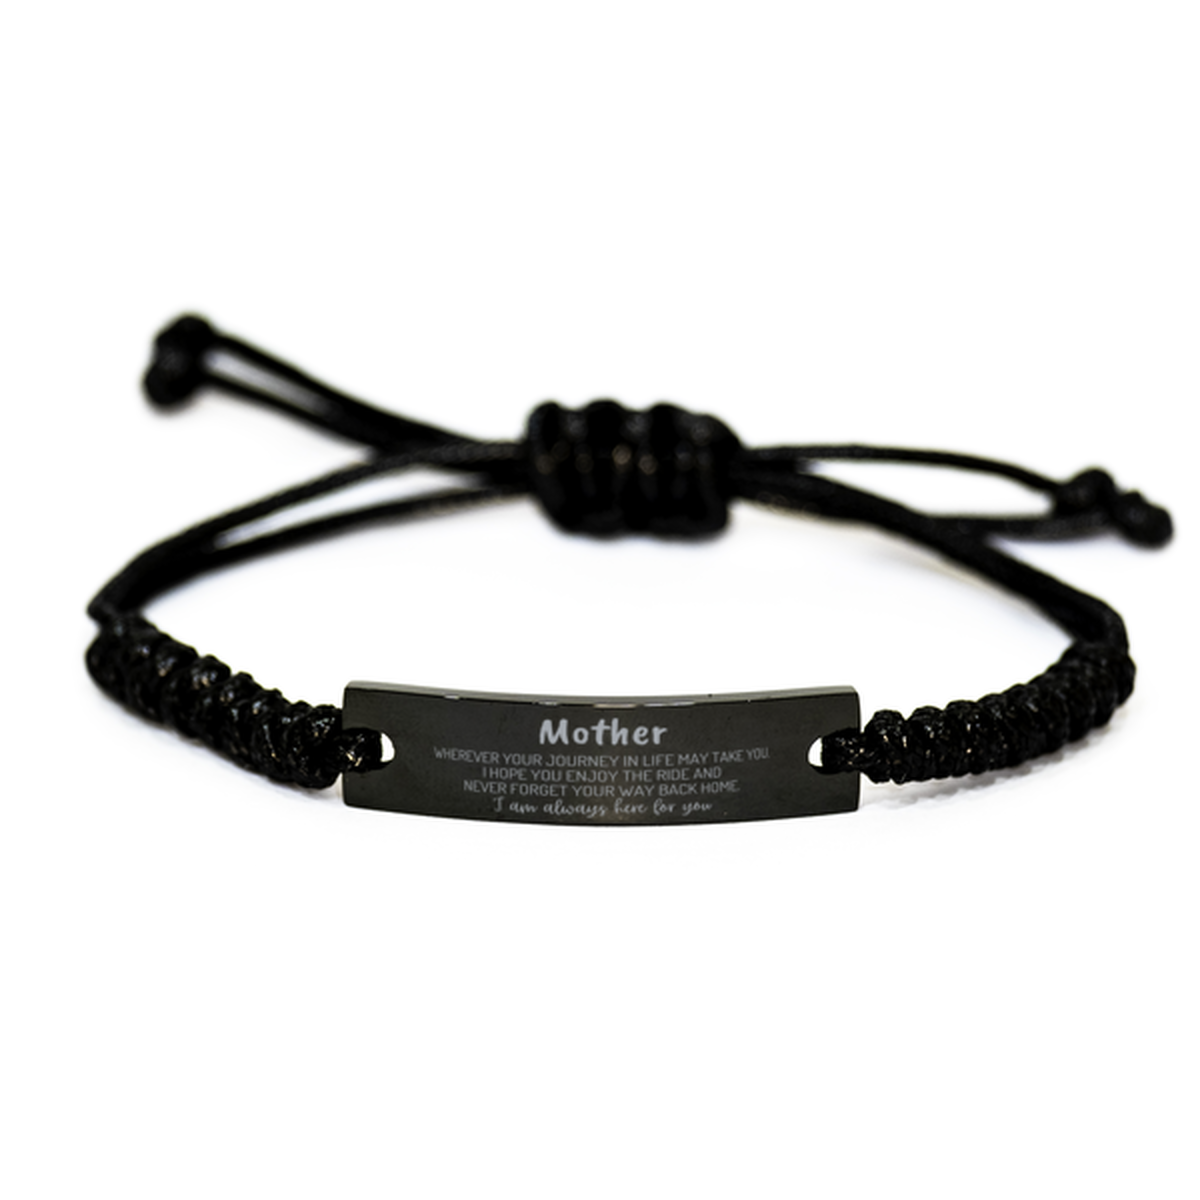 Mother wherever your journey in life may take you, I am always here for you Mother Black Rope Bracelet, Awesome Christmas Gifts For Mother, Mother Birthday Gifts for Men Women Family Loved One